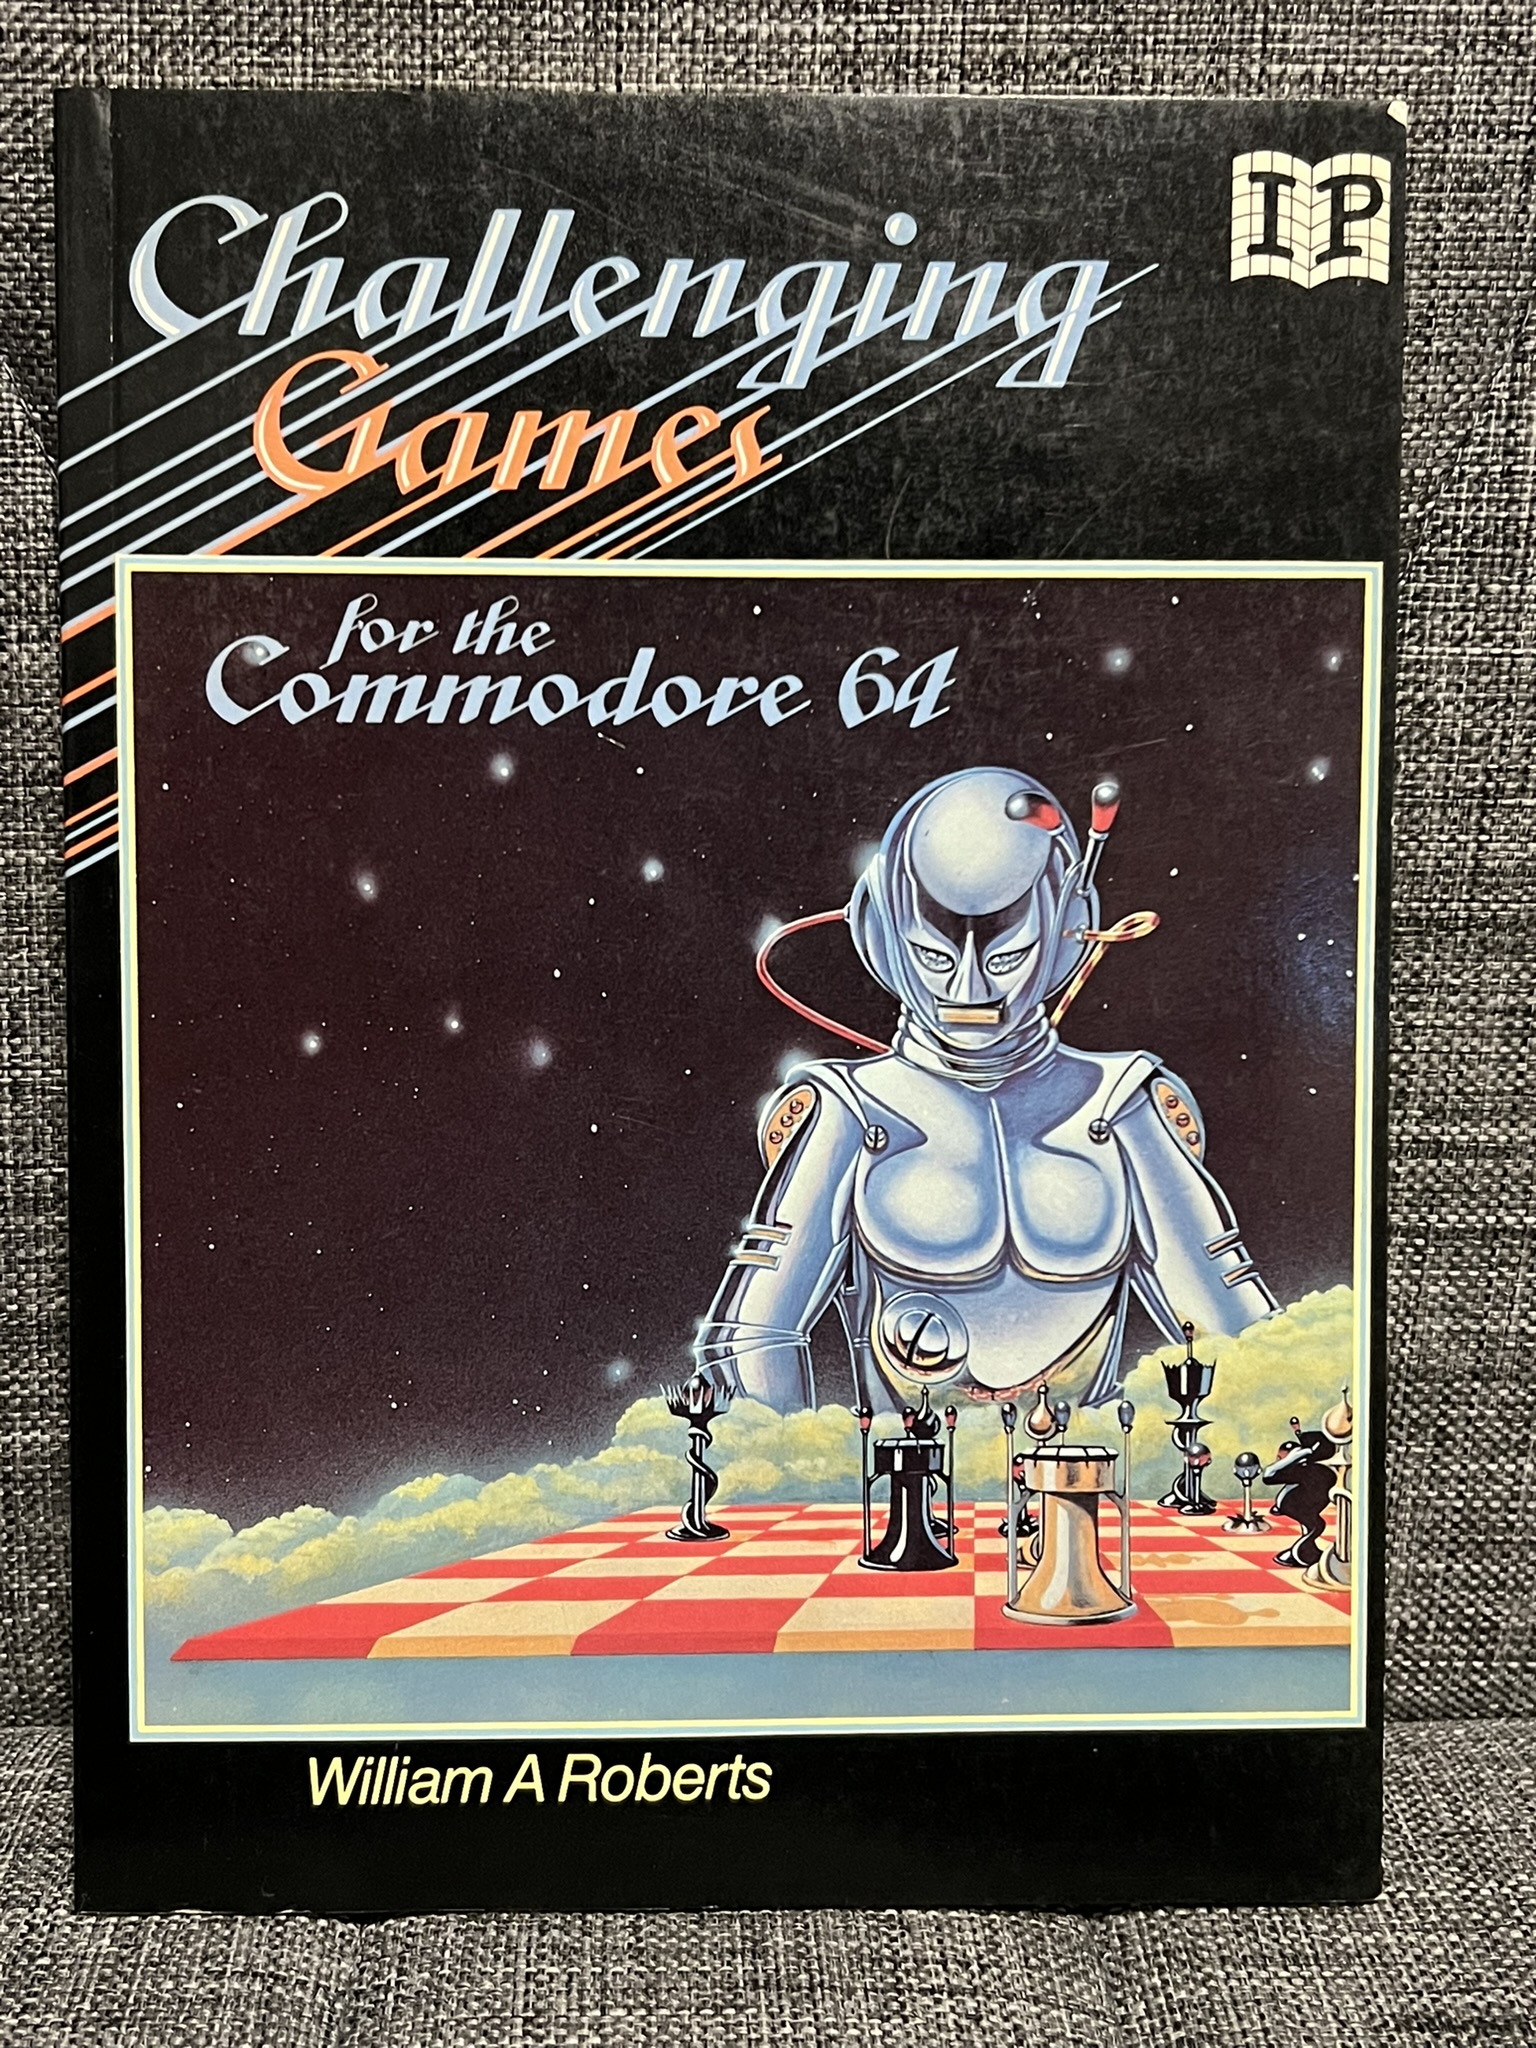 Challenging Games For The Commodore 64